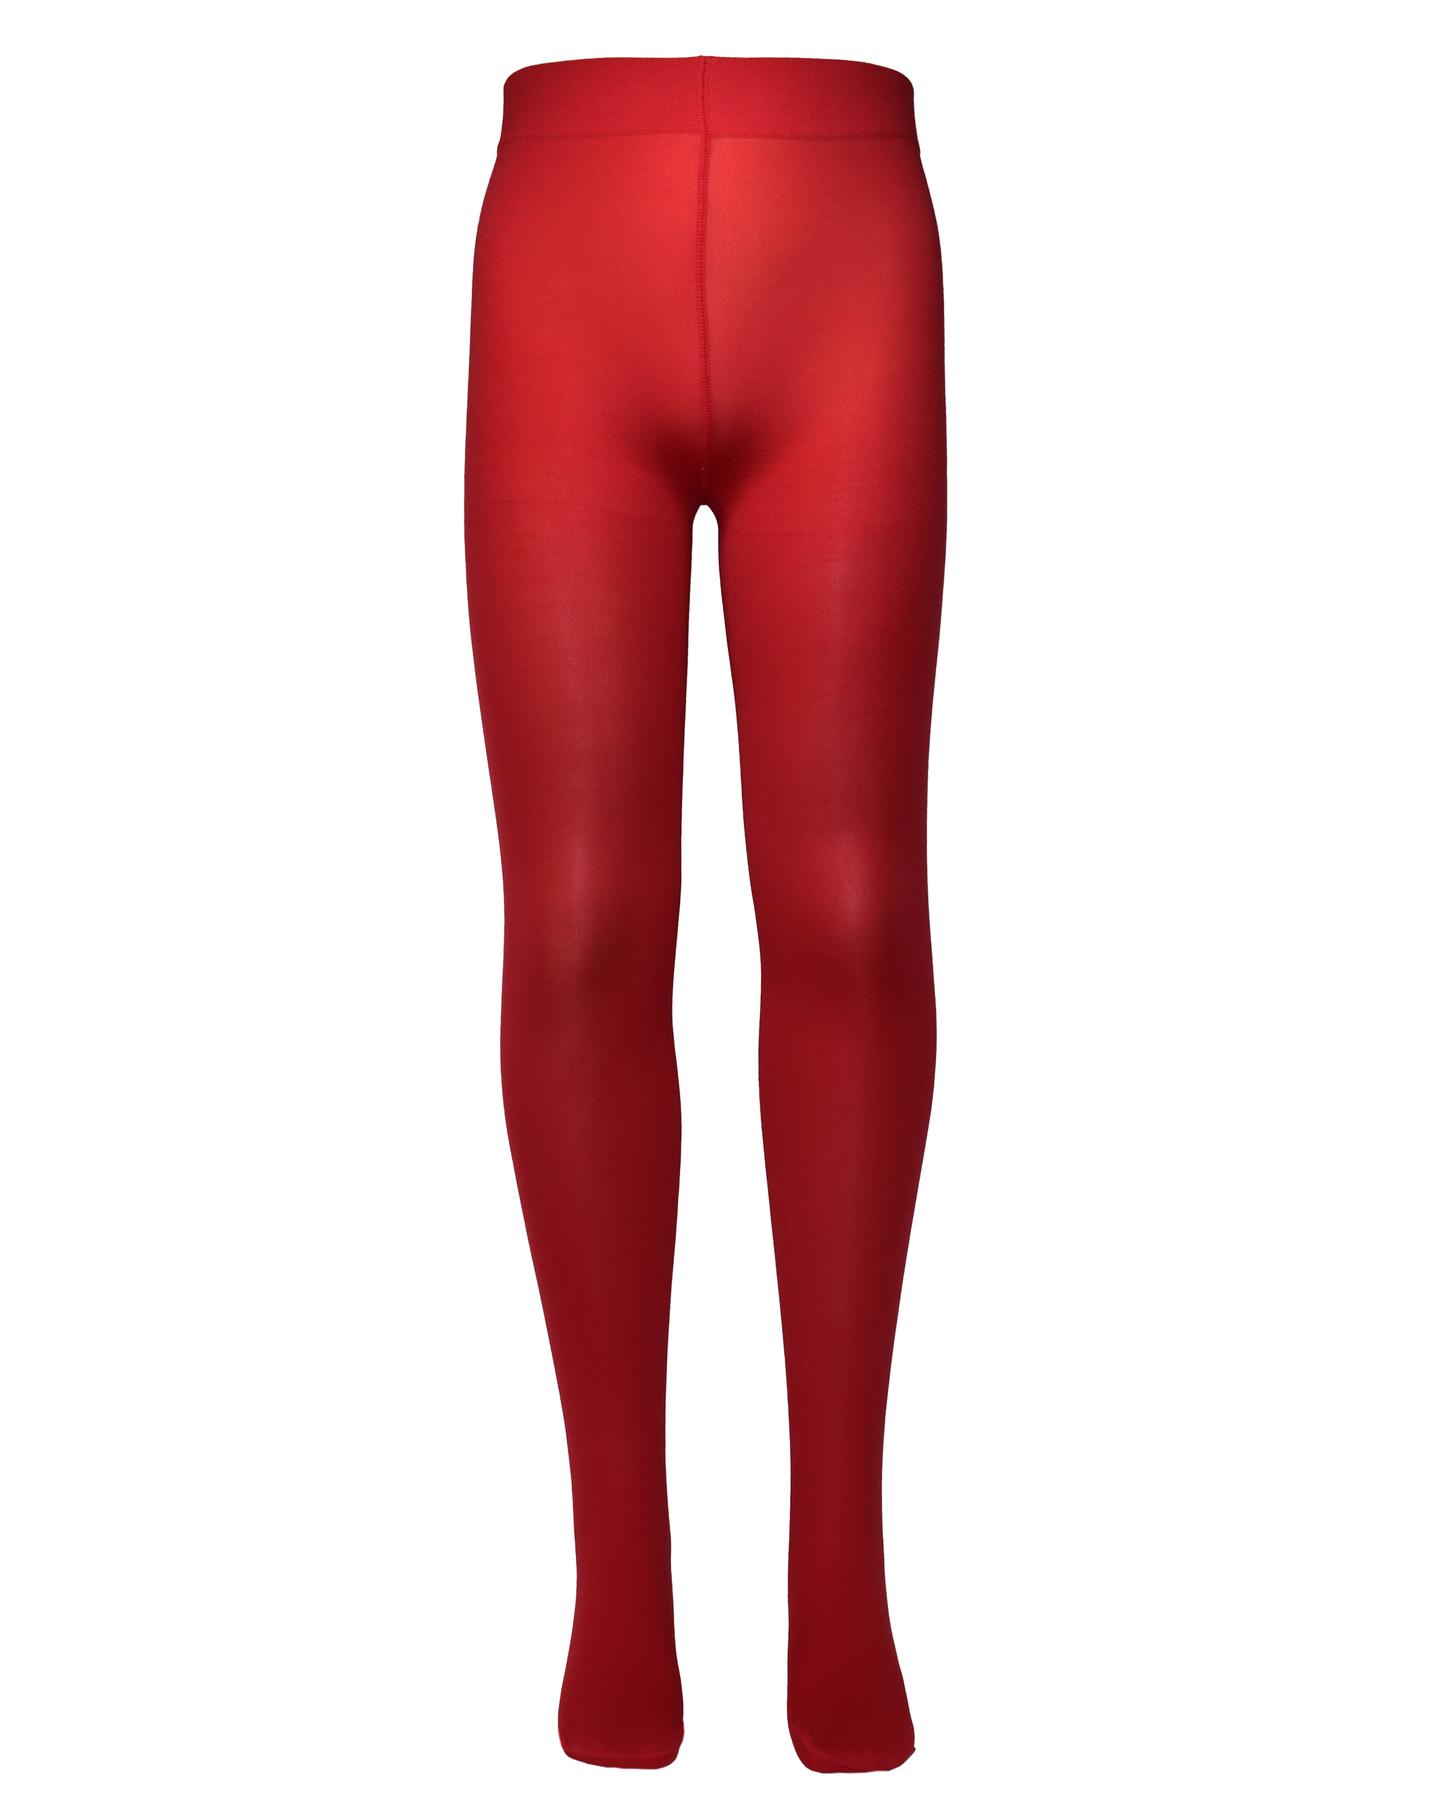 Omsa MiniVelour 40 Tights - Deep red soft and matte opaque plain kid's tights with flat seams, deep waistband and reinforced toes.